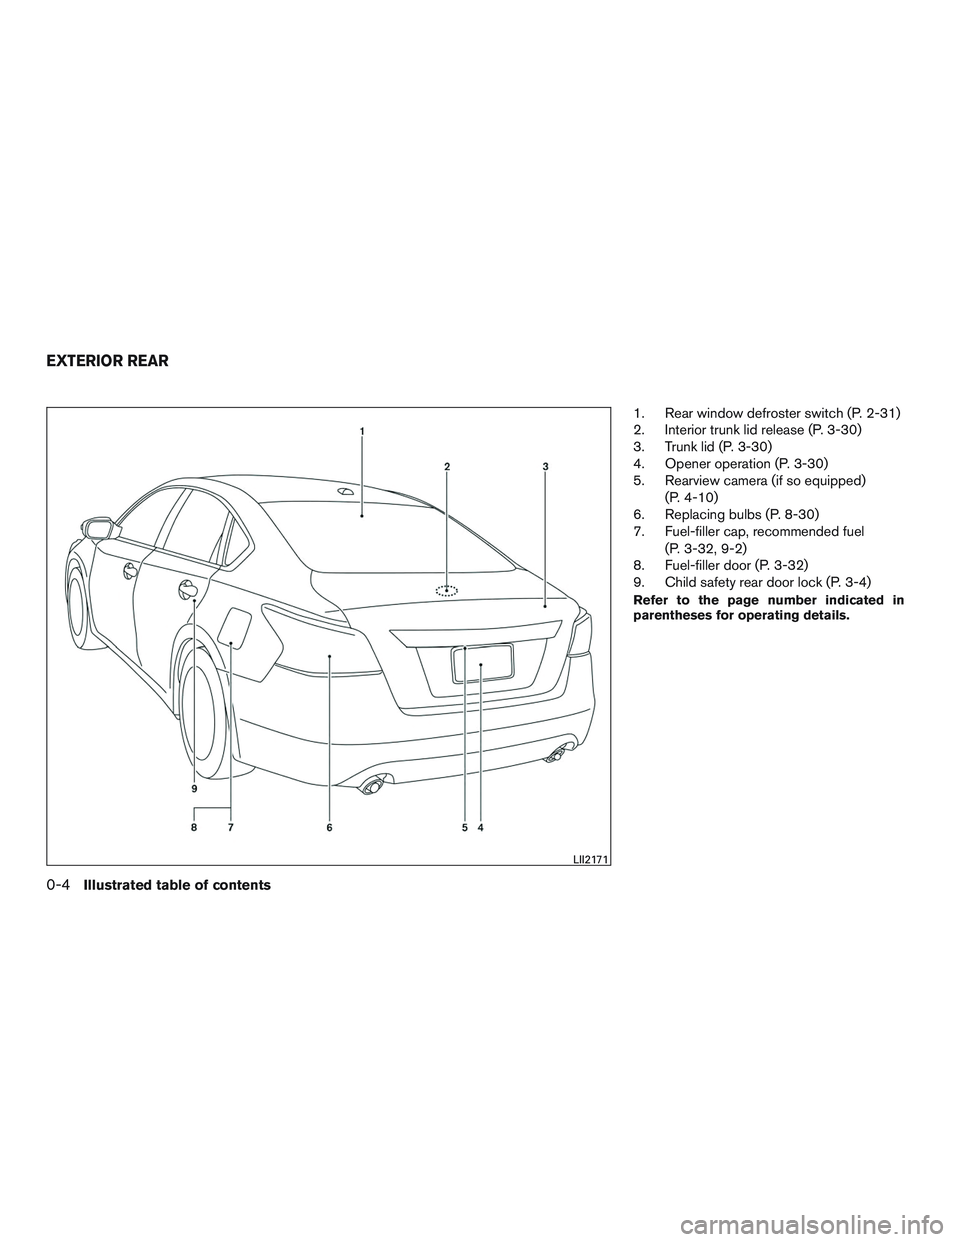 NISSAN ALTIMA SEDAN 2015 User Guide 1. Rear window defroster switch (P. 2-31)
2. Interior trunk lid release (P. 3-30)
3. Trunk lid (P. 3-30)
4. Opener operation (P. 3-30)
5. Rearview camera (if so equipped)(P. 4-10)
6. Replacing bulbs (